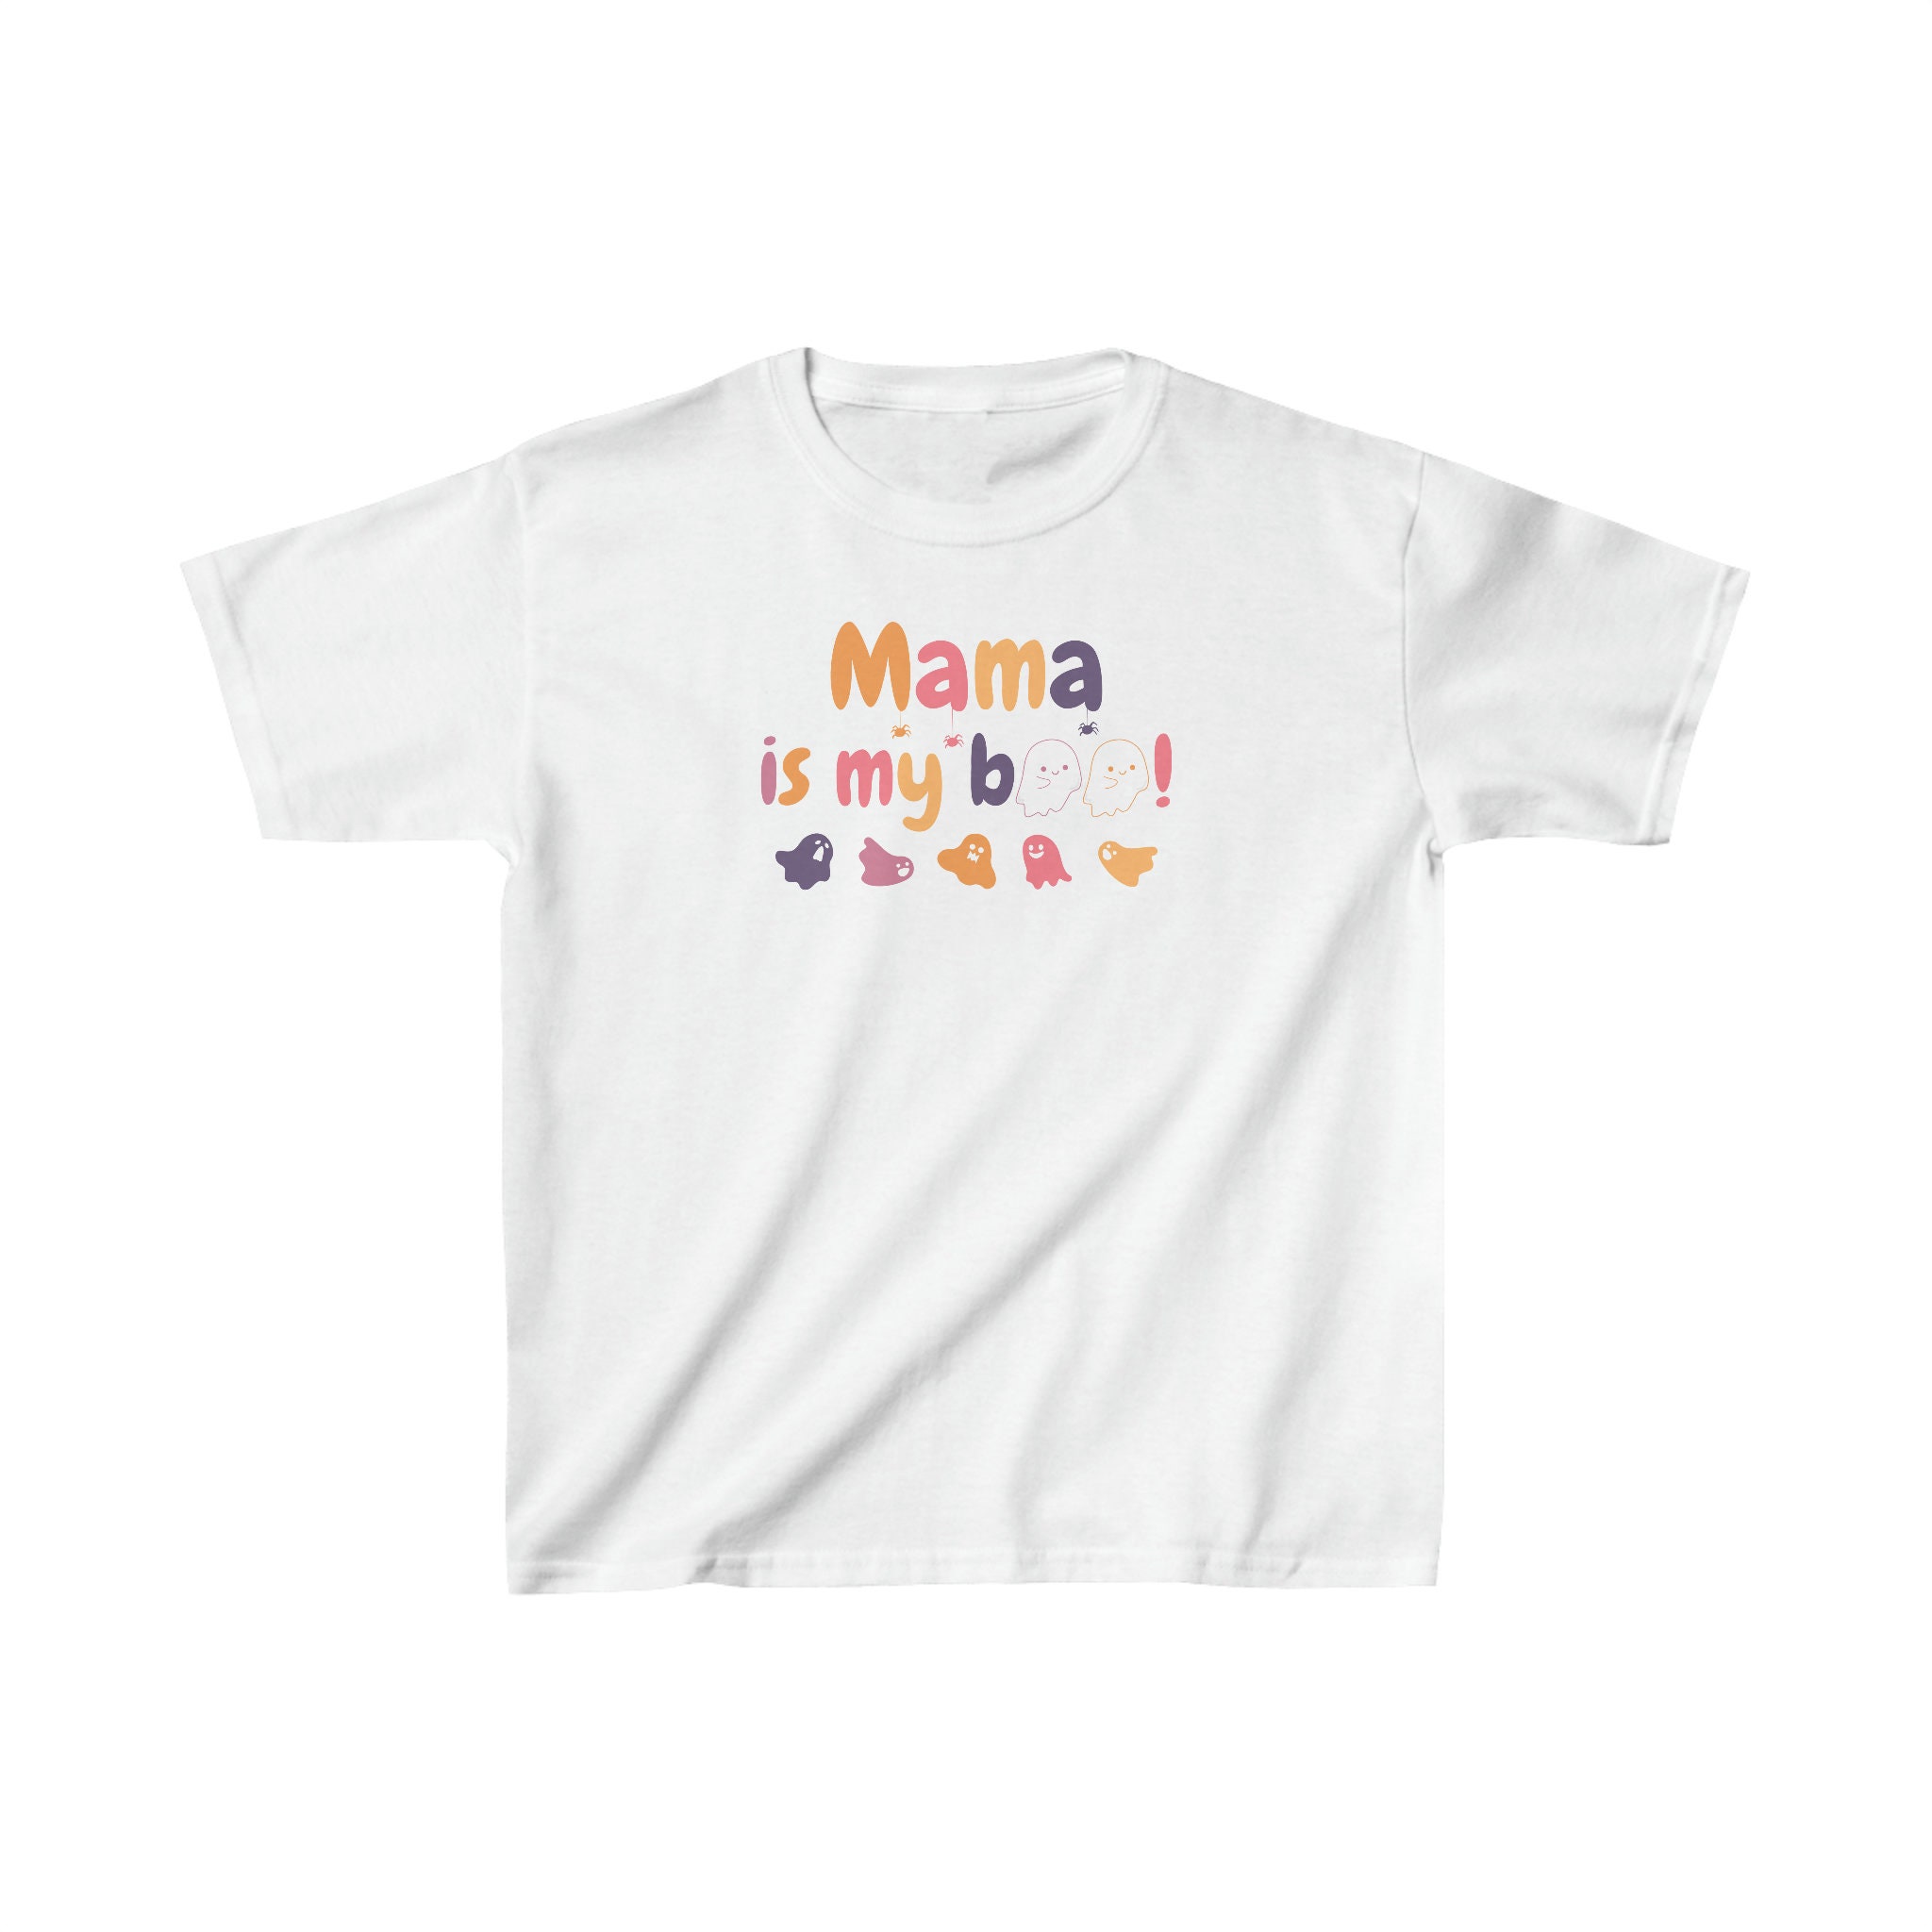 Discover Mama Is My Boo! Kids Shirt, Halloween Tee, Halloween Tshirt, Funny Halloween Shirt, Halloween Gift, Halloween Party